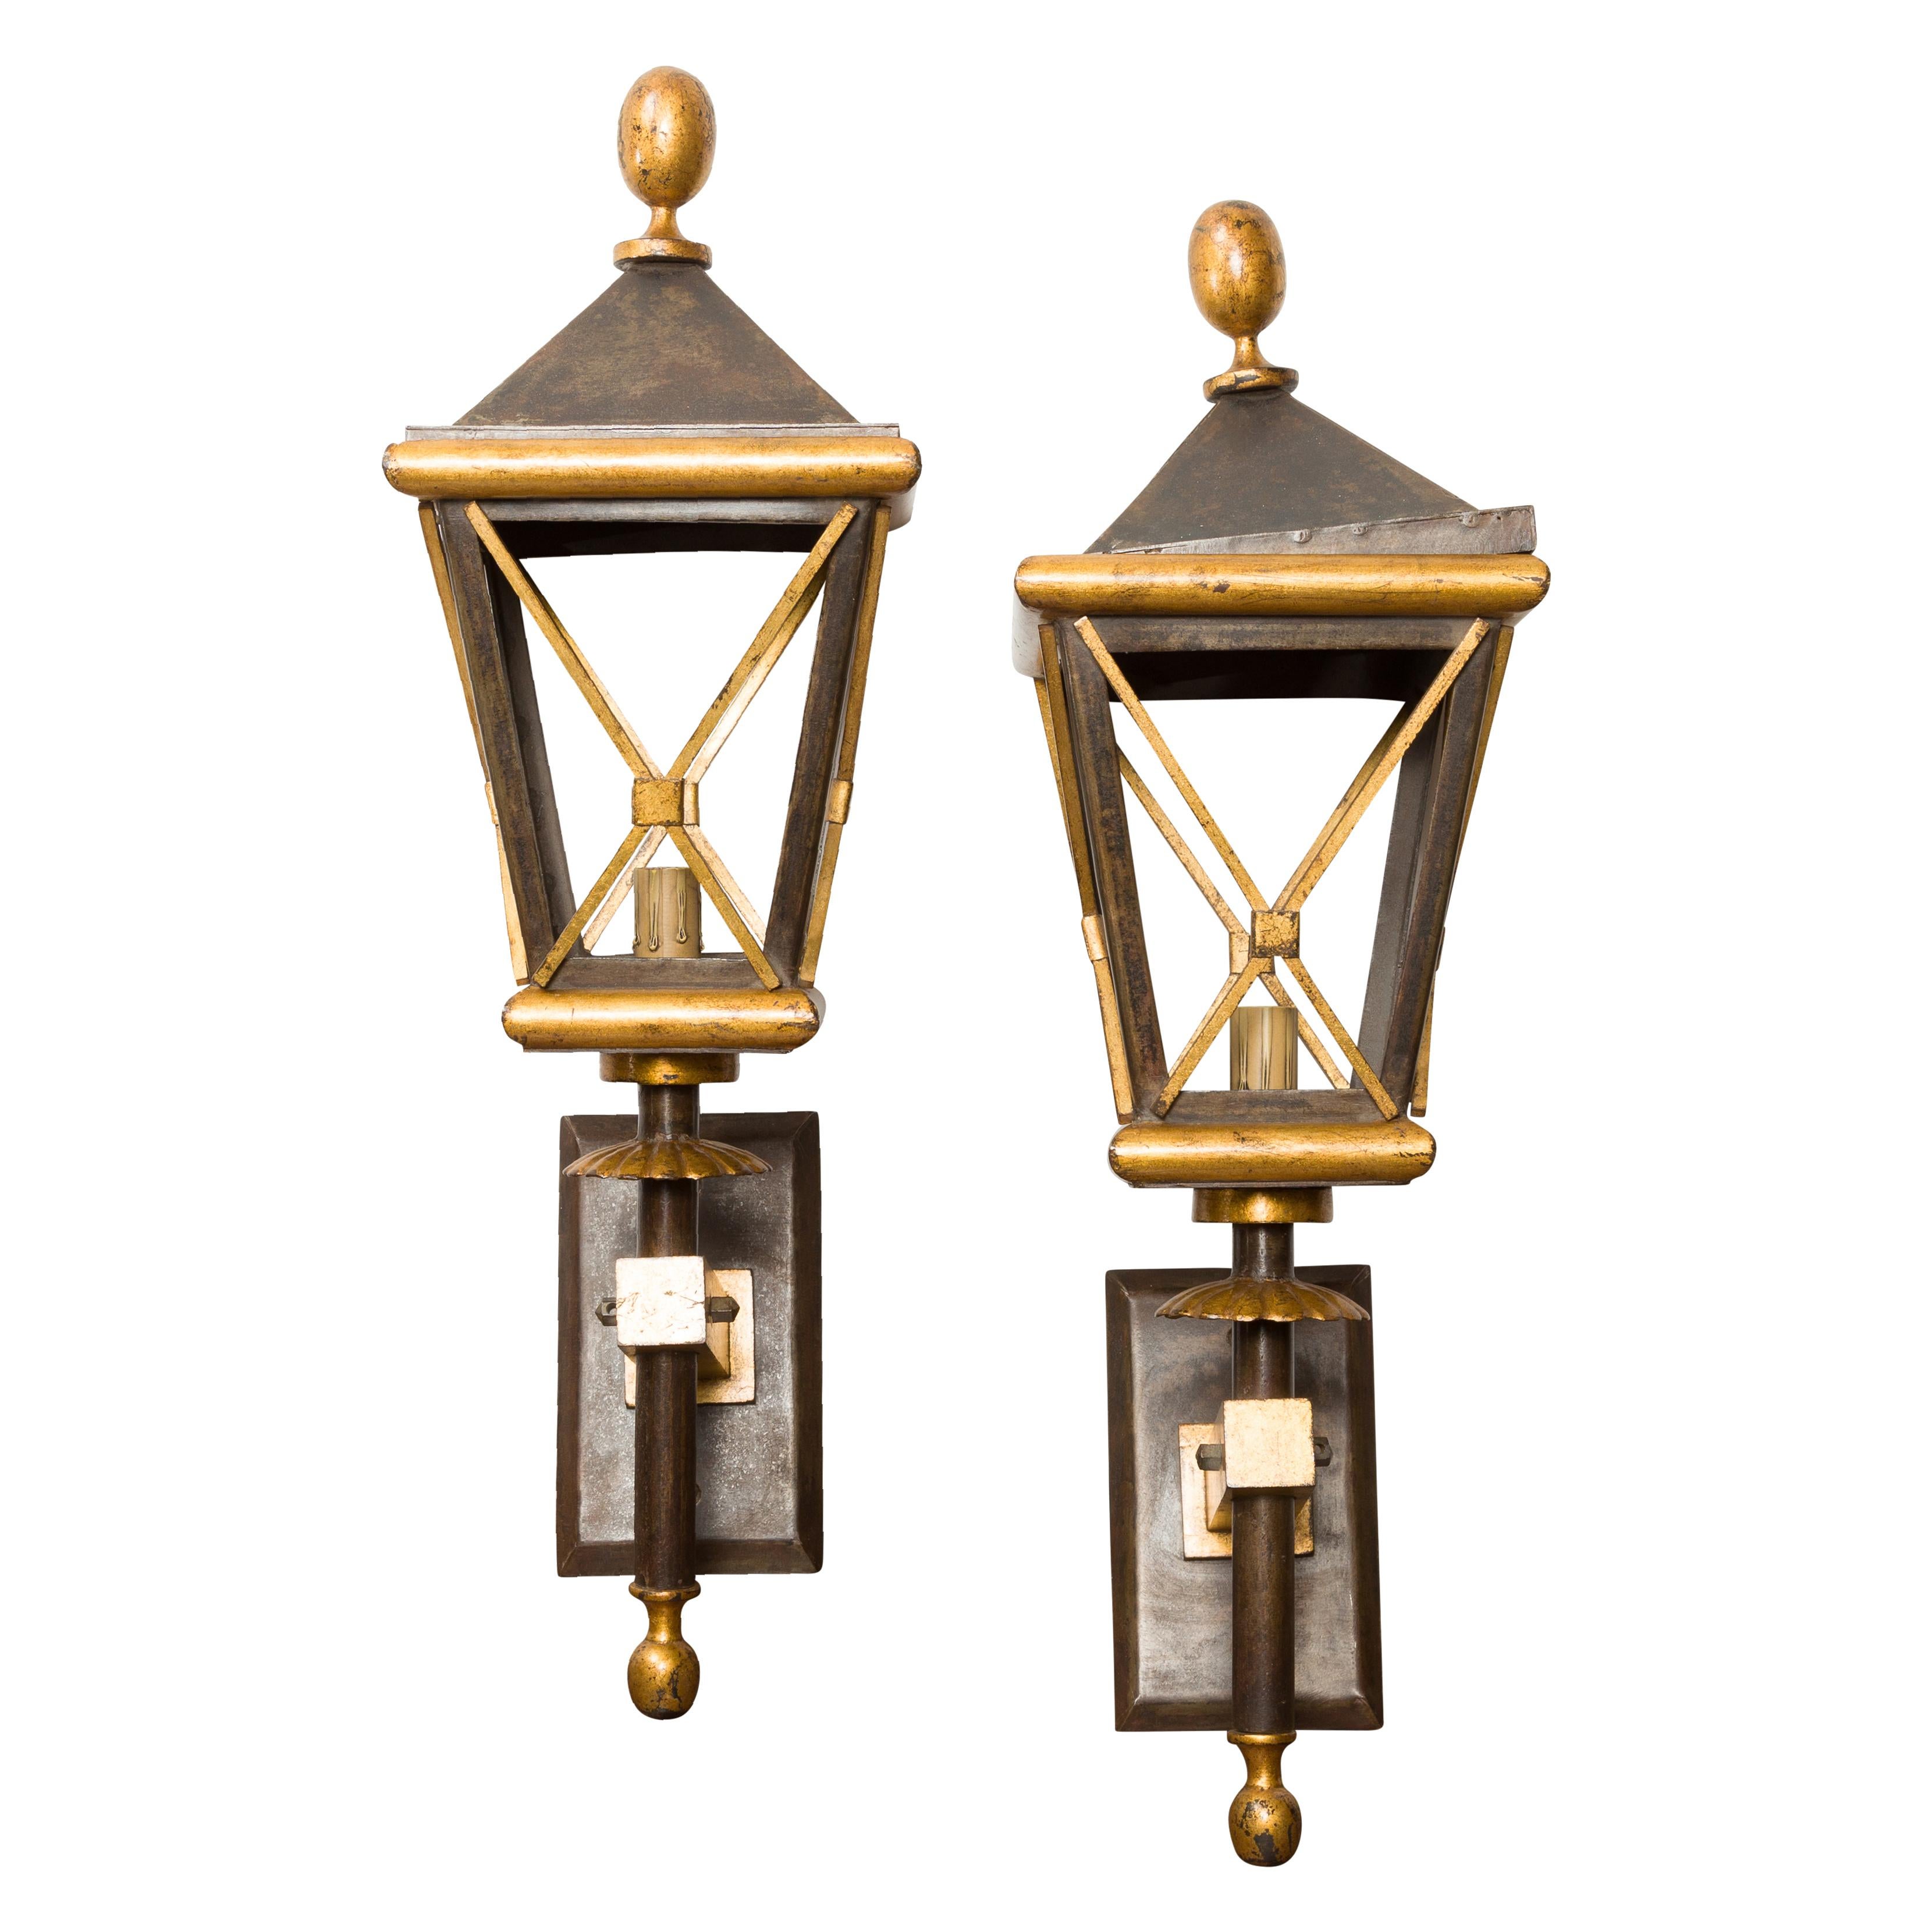 Pair of French Midcentury Gilt Iron Wall Mounted Lanterns with Single Lights For Sale